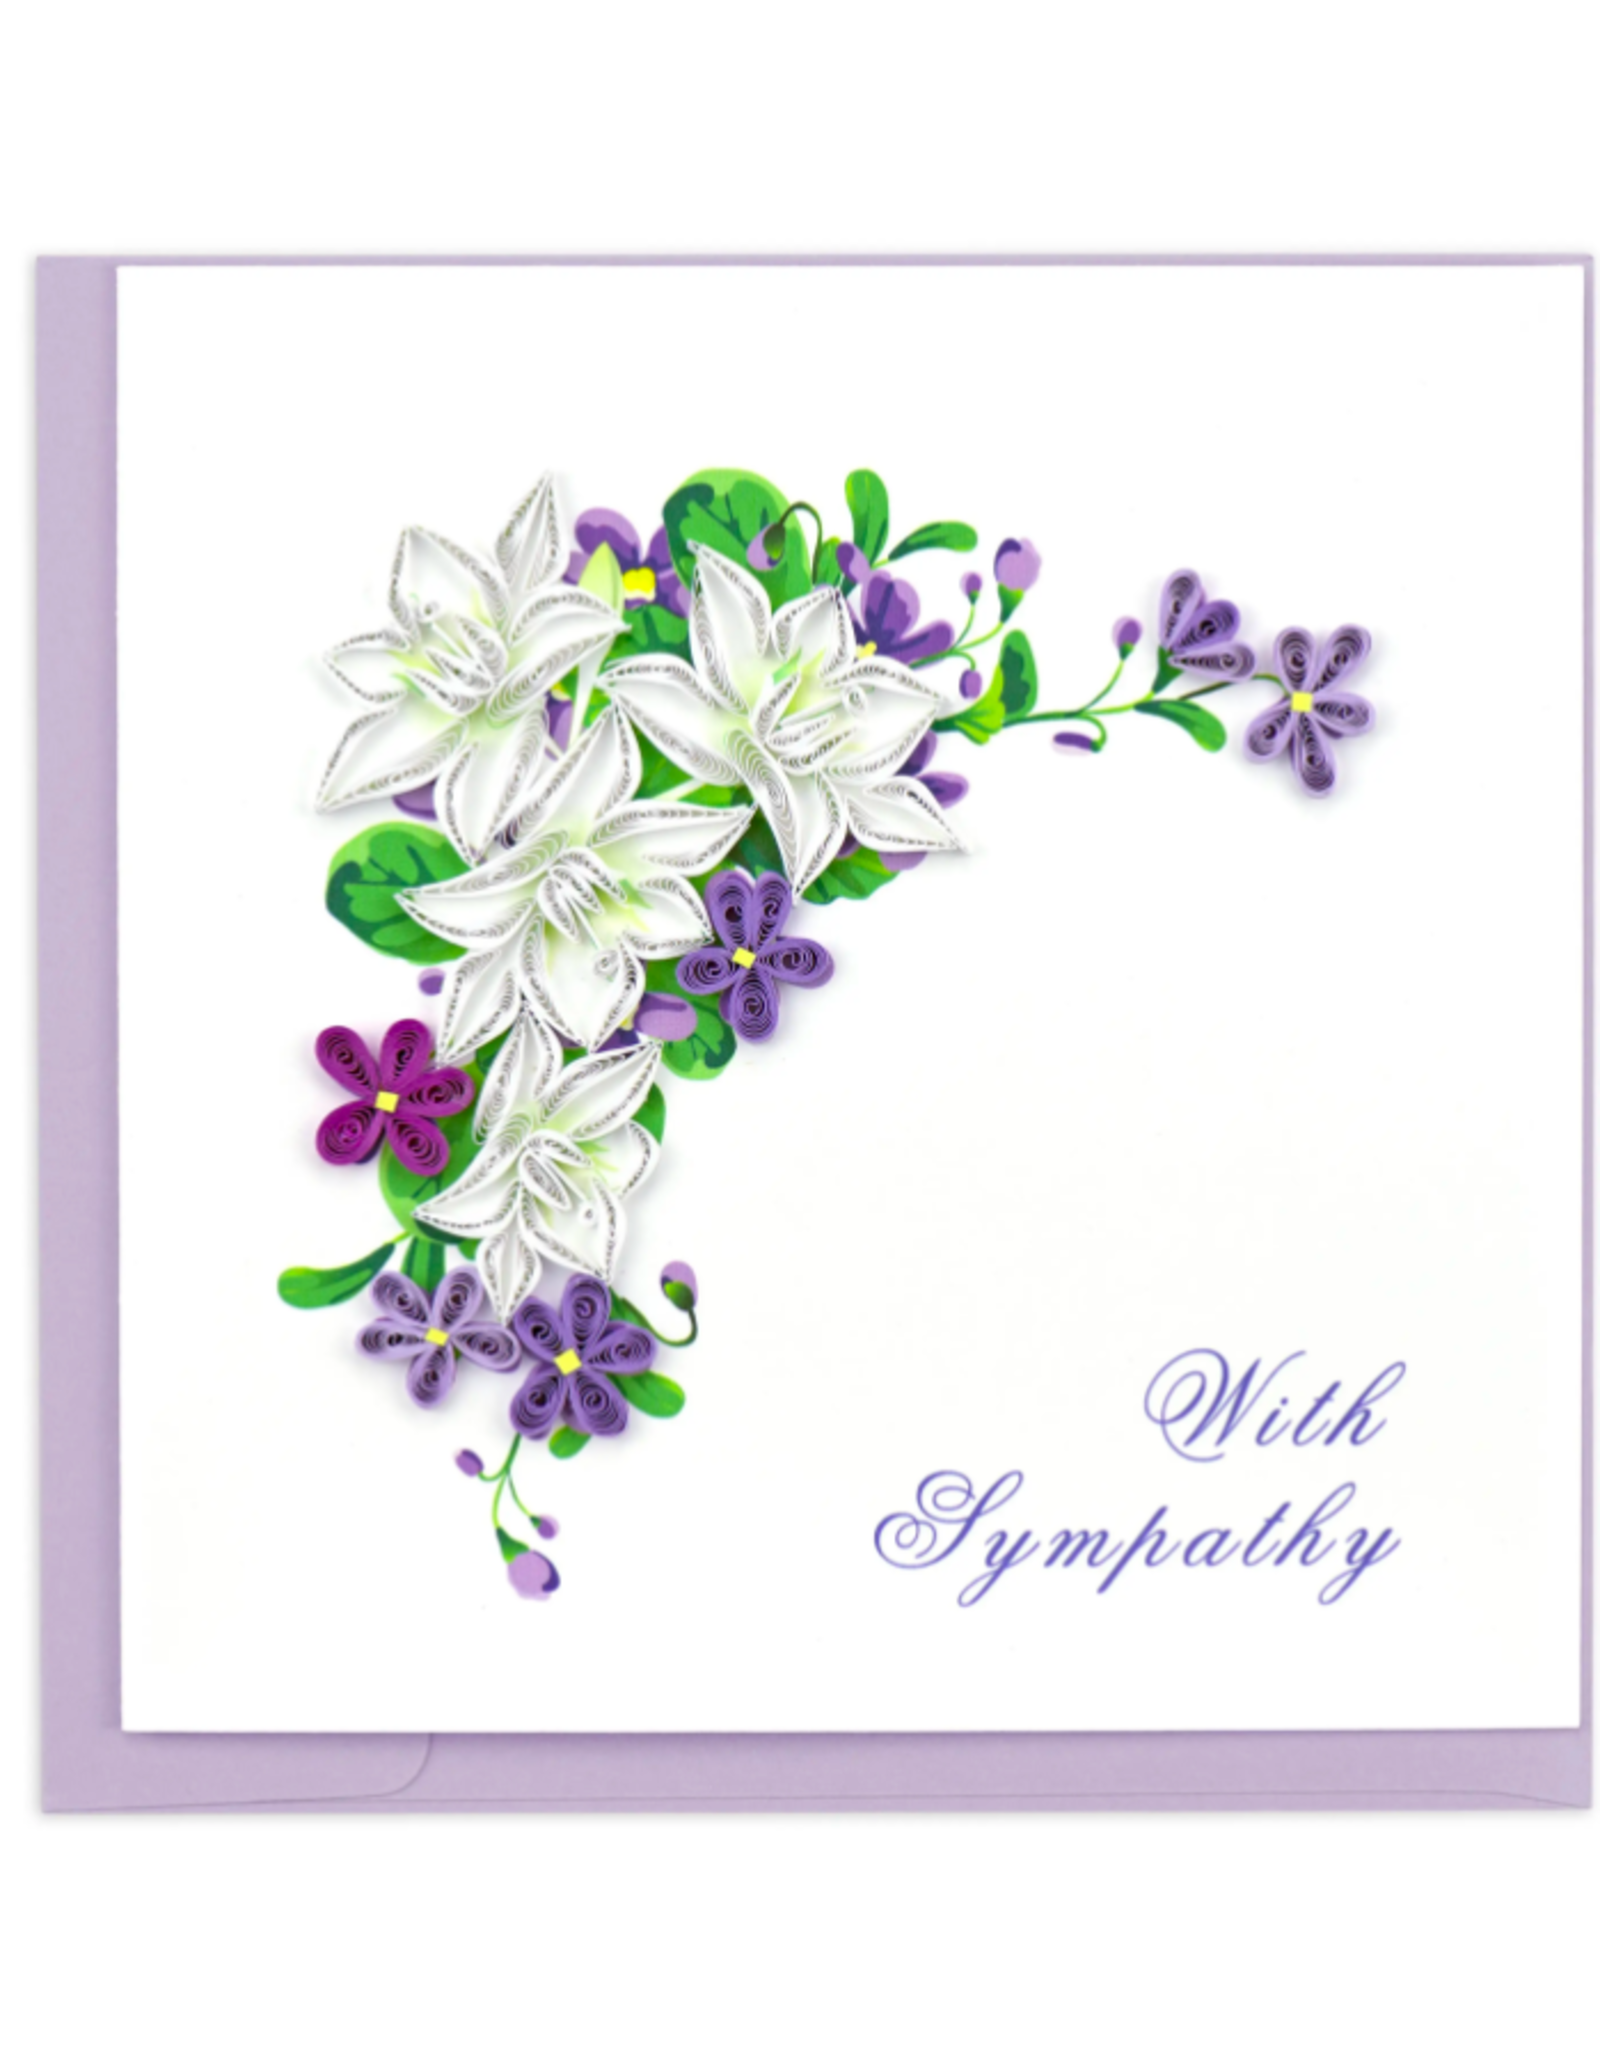 Trade roots Flower Sympathy, Quilling Card, Vietnam